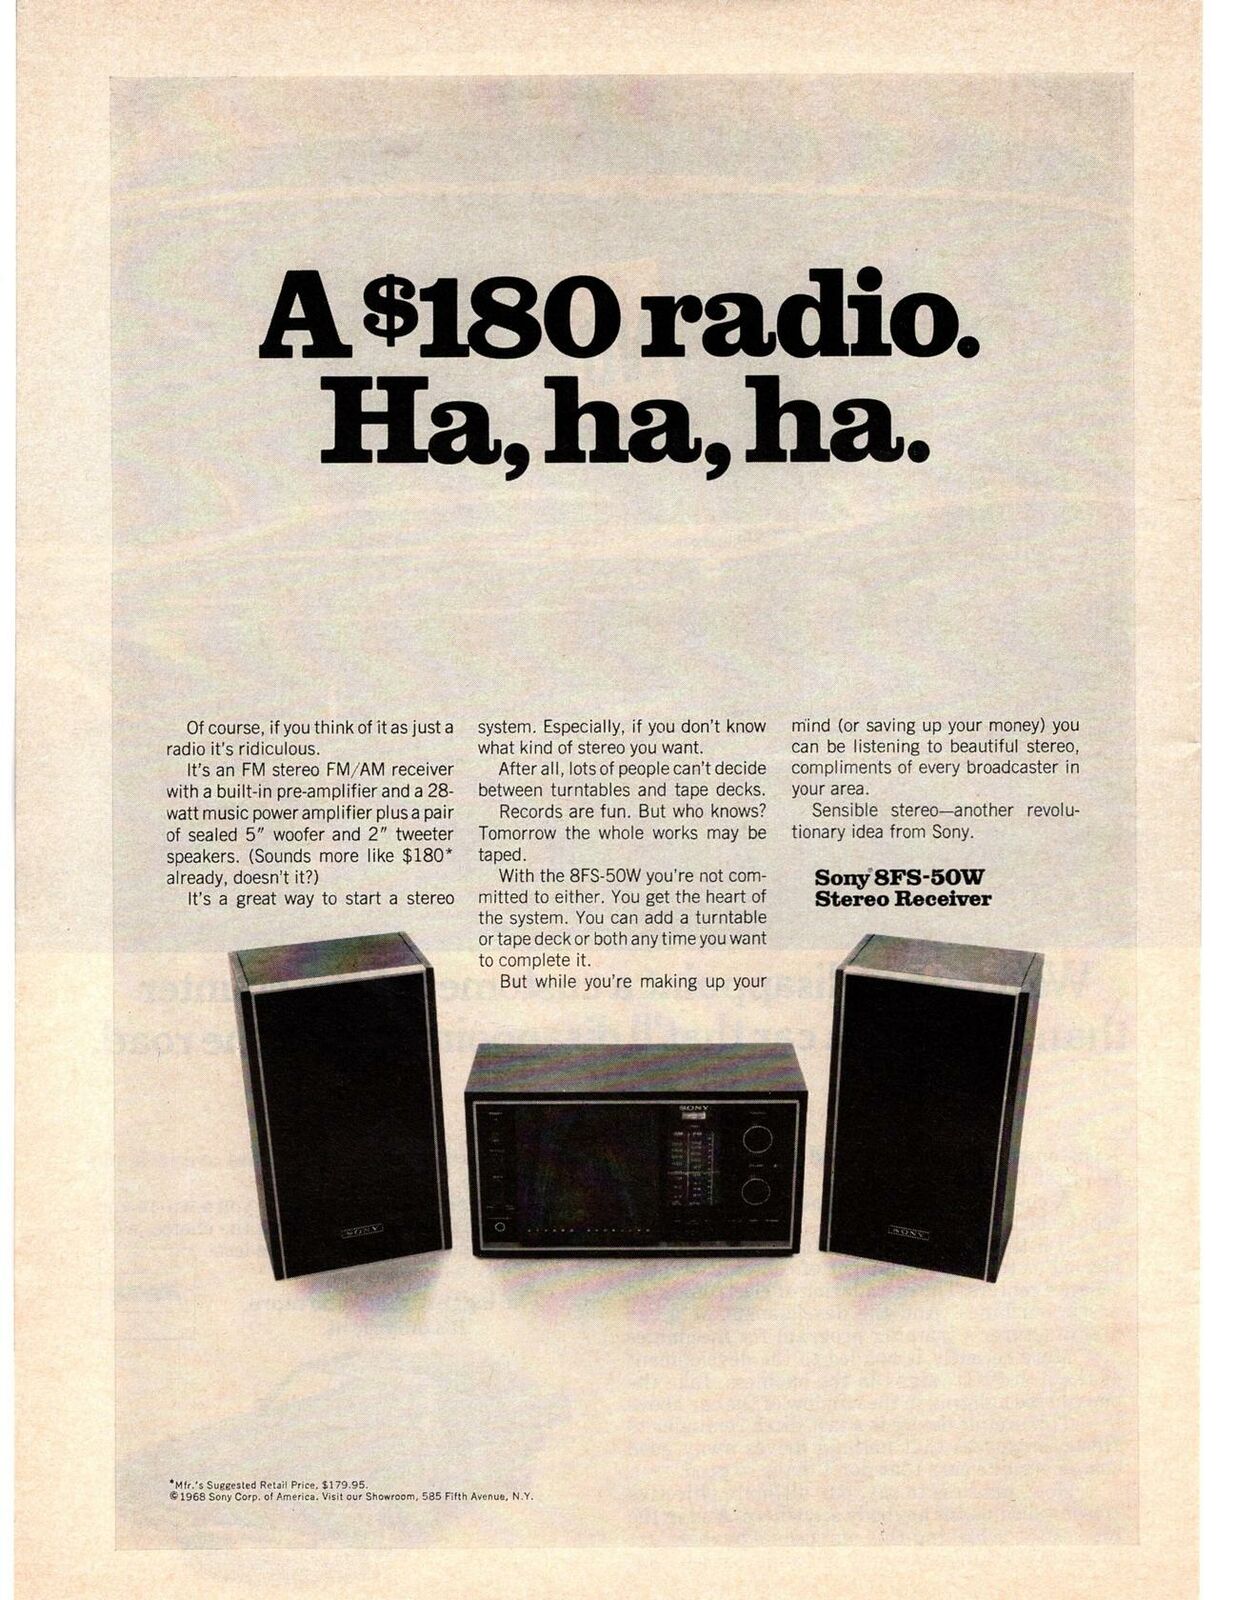 1968 Sony 8FS-50W FM Stereo Receiver System Woofer Tweeter Speakers Print Ad